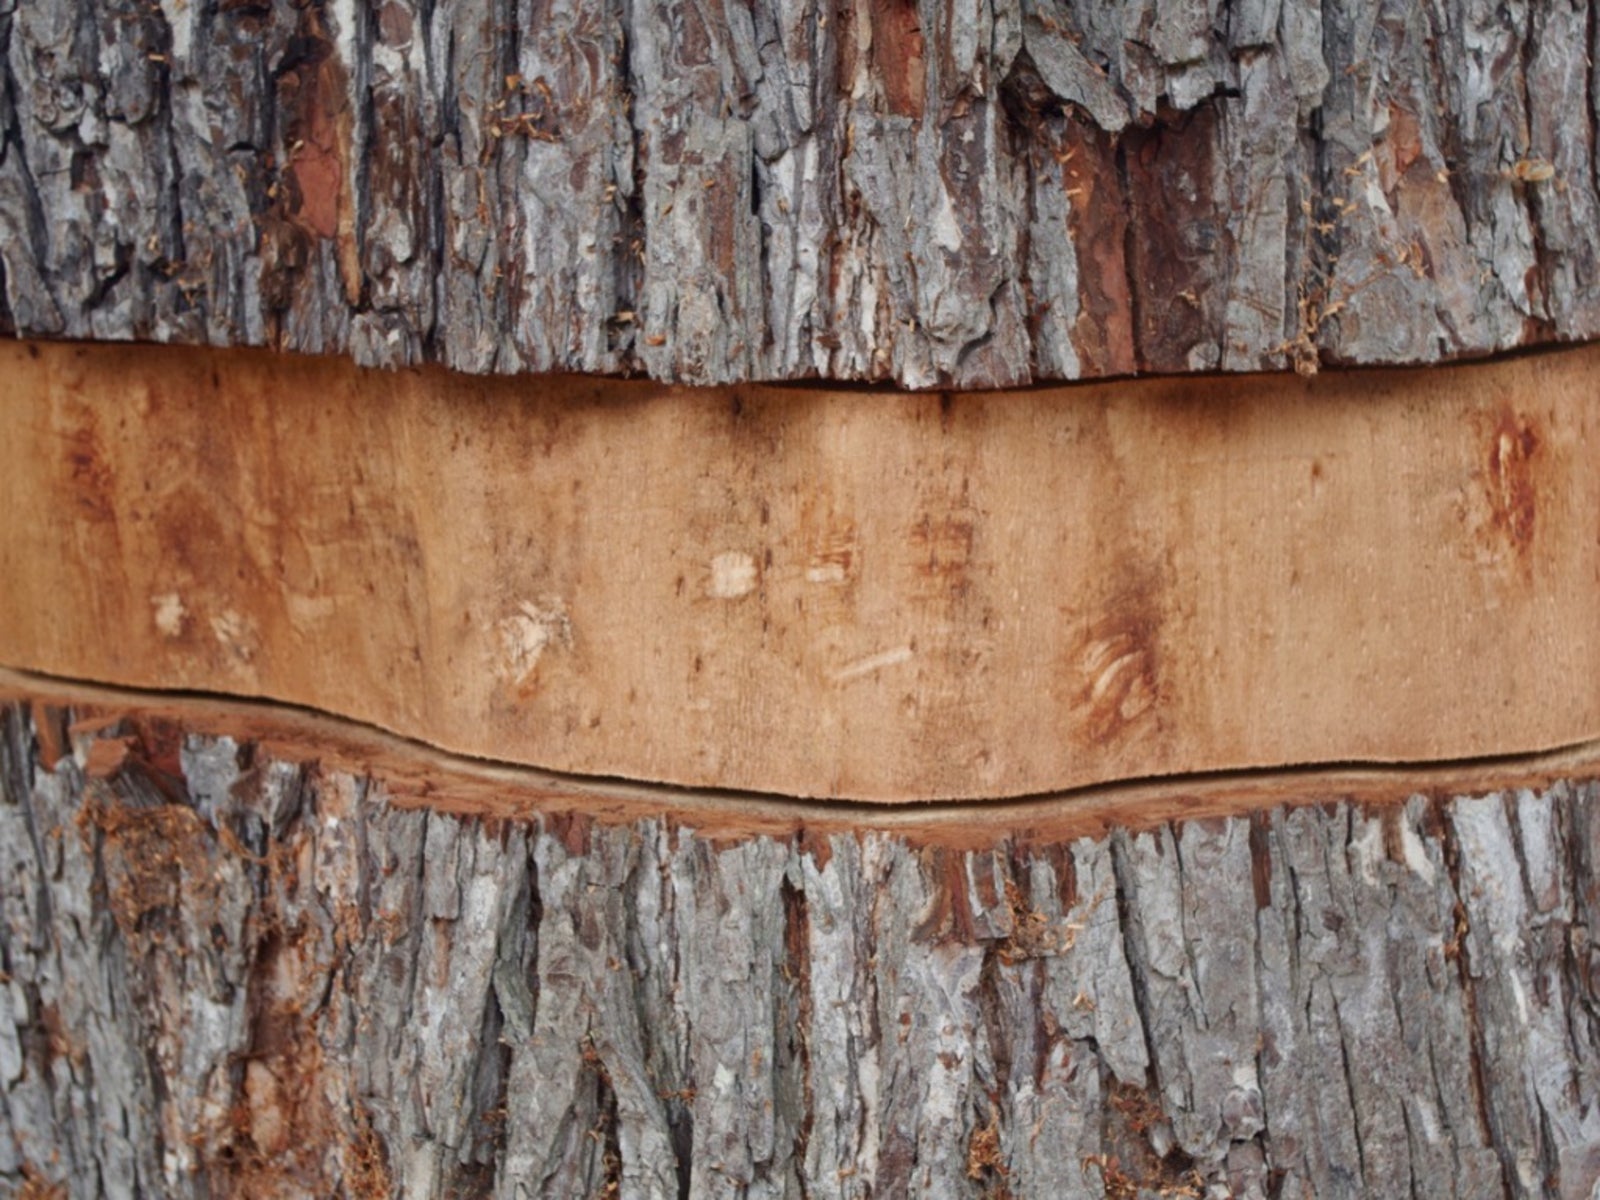 HELP! How to save a tree that was accidently girdled??? | Arborist,  Chainsaw & Tree Work Forum